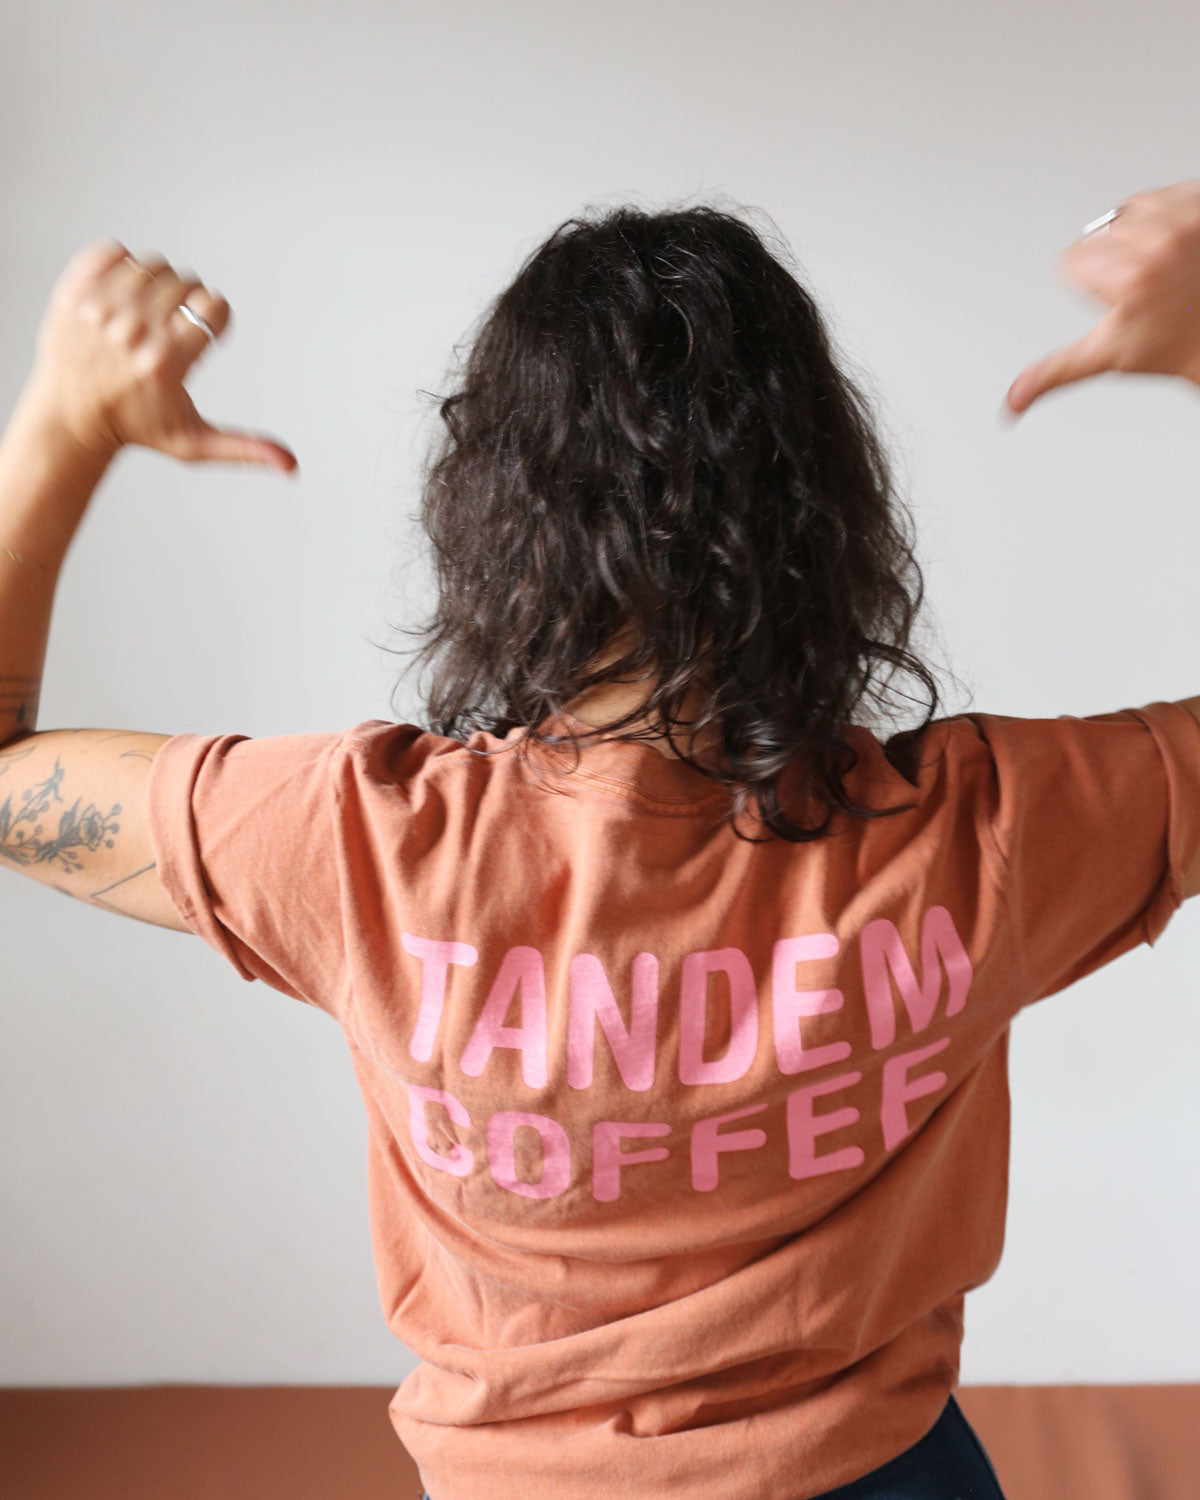 A person with curly hair, seen from behind, is wearing a casual elegant brown Bike + Tandem Coffee Tee from Tandem Coffee Roasters with the words "Tandem Coffee" printed in pink. They have their thumbs pointed towards themselves. The person has tattoos on their arm. The background is plain and out of focus, highlighting the logo tee's cotton Comfort Color fabric.